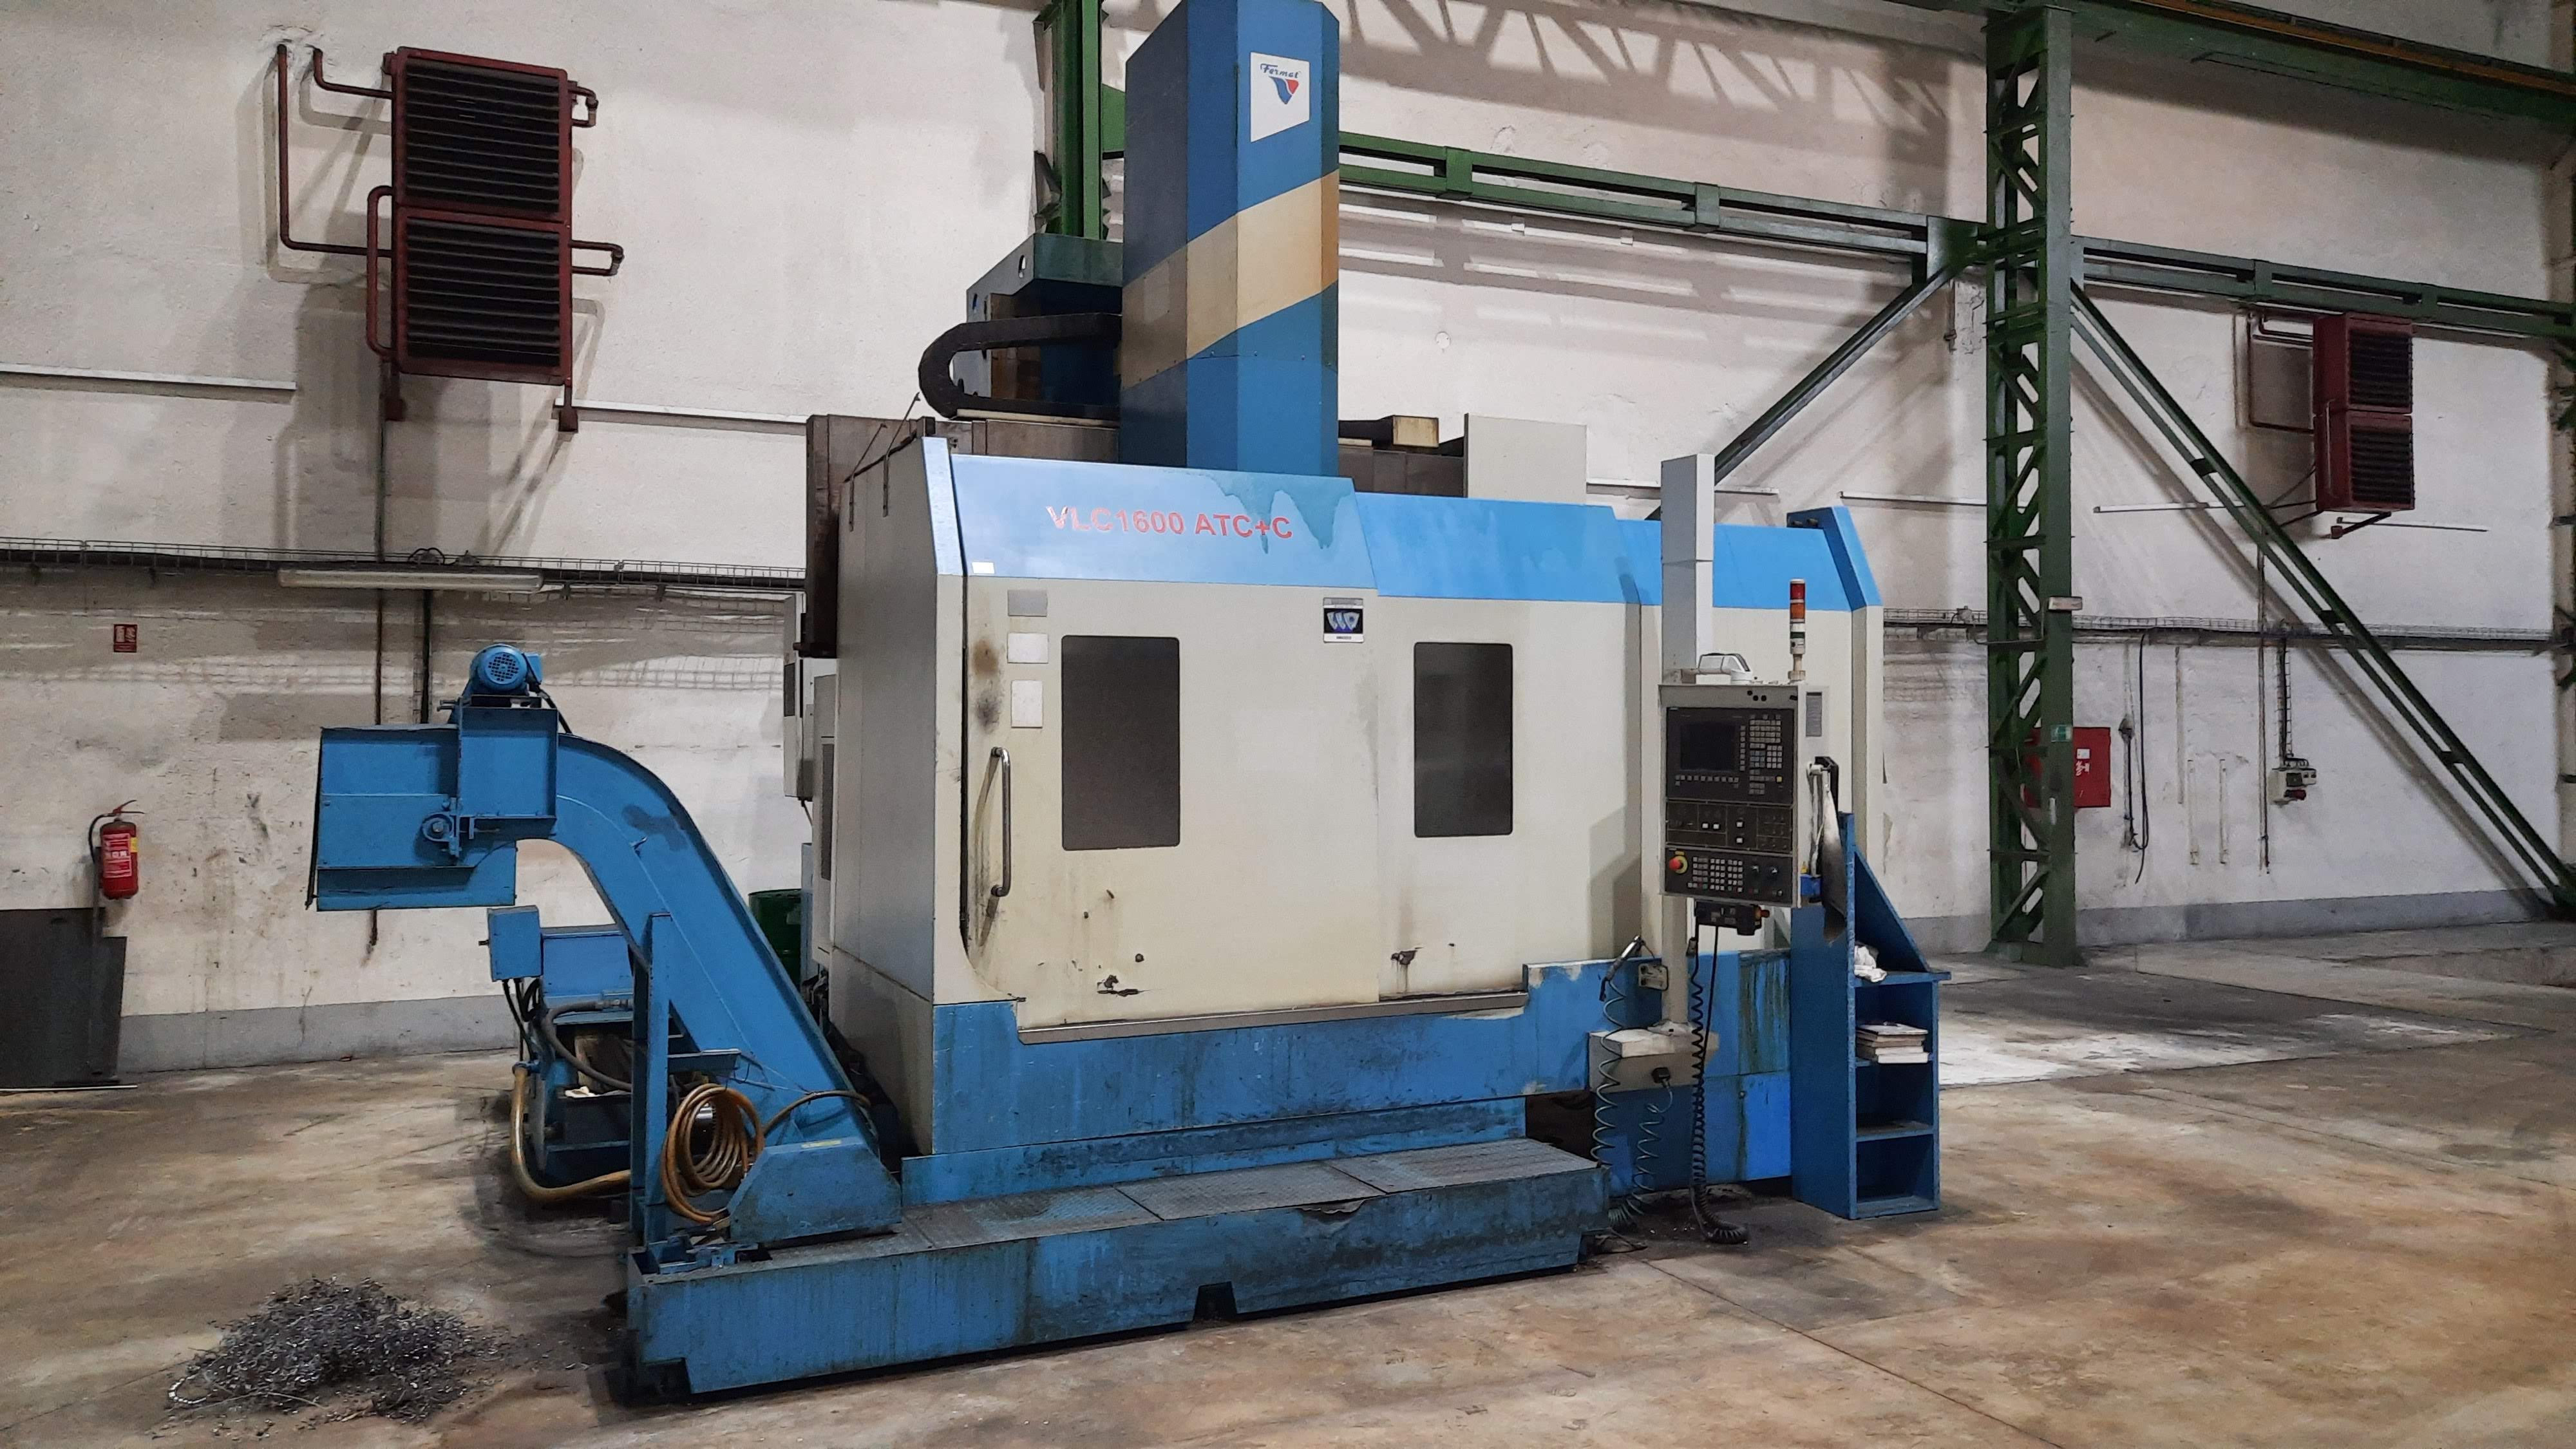 Vertical Turret Lathes with single column VLC 1600 ATC+C